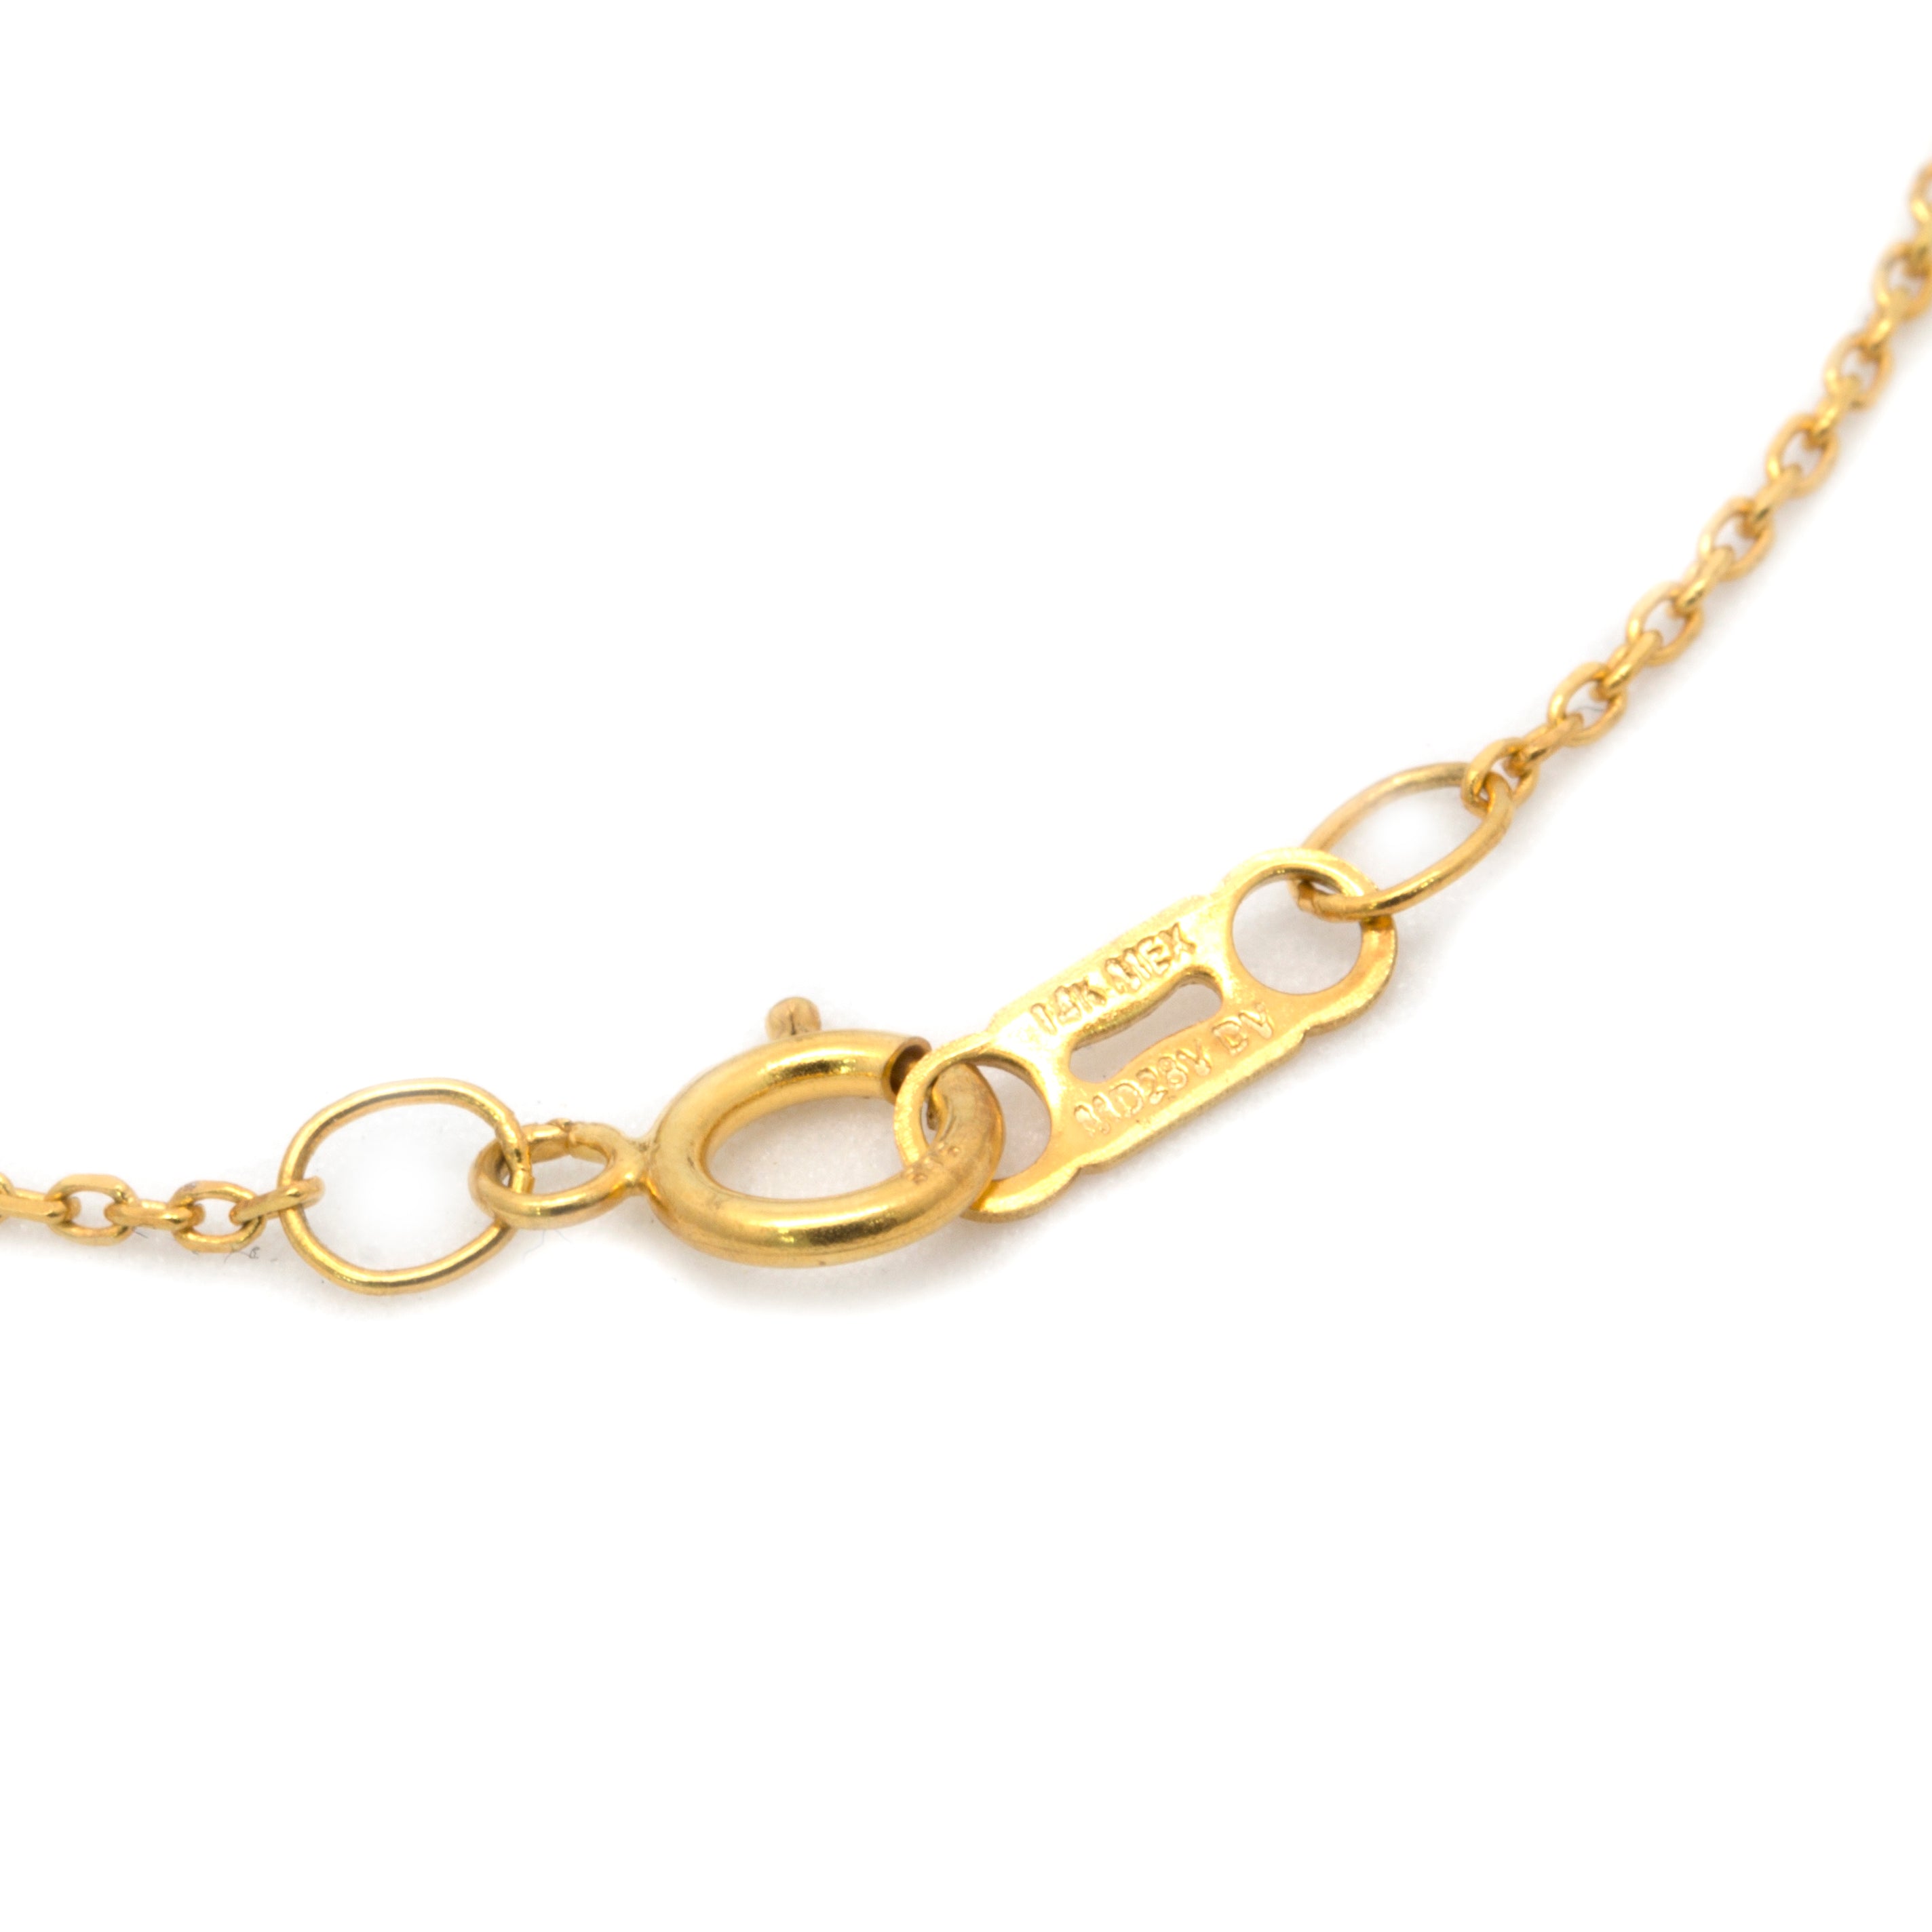 "Taurus (April 20th - May 20th)" 14K Yellow Gold Pendant and Chain with Cortez Keshi Pearls